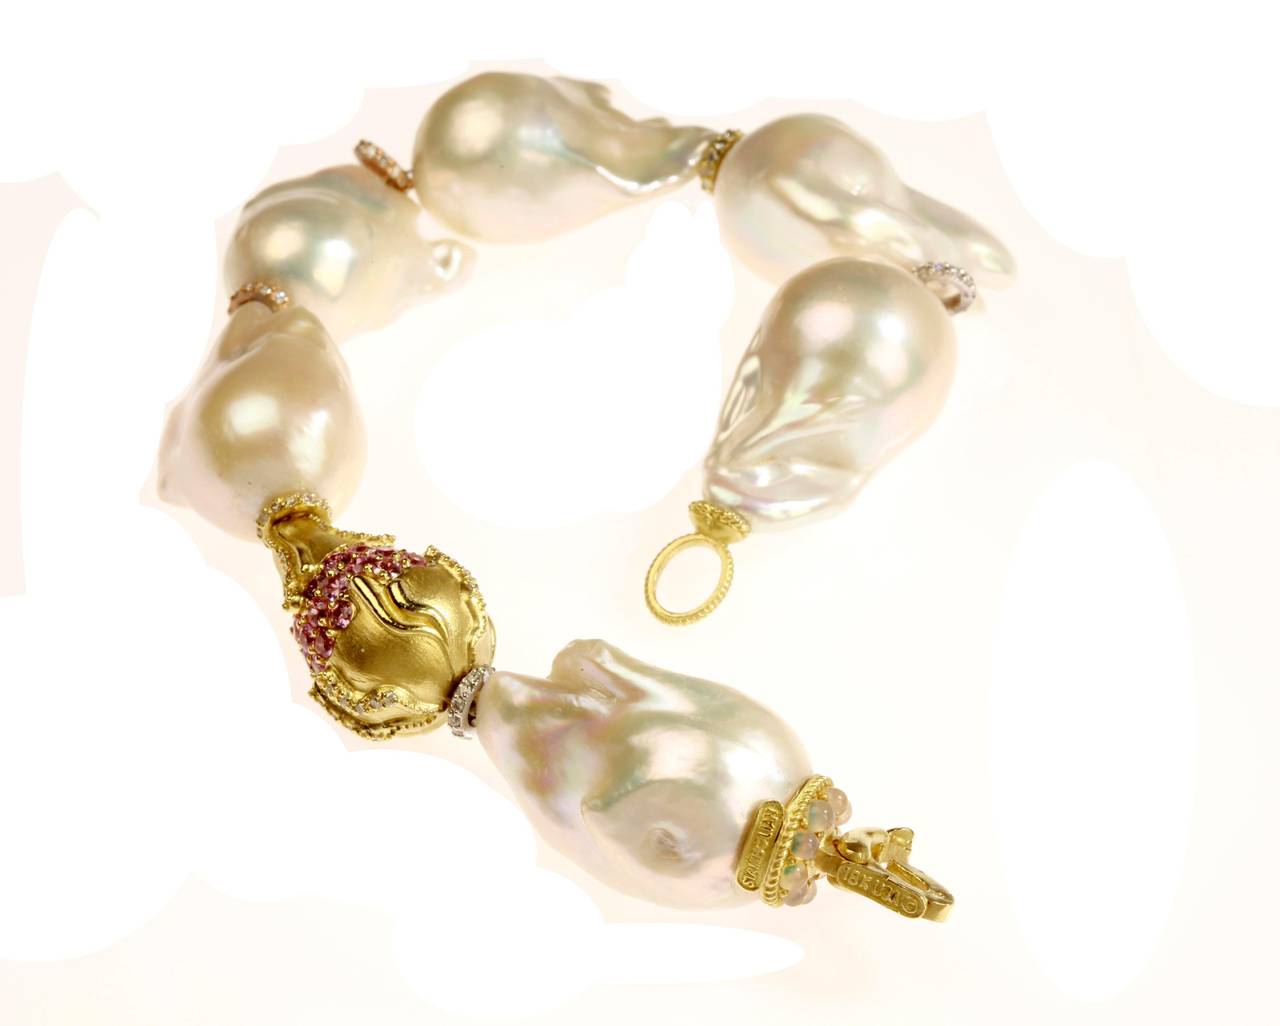 Baroque Pearl Bracelet with 18K Gold Rondel and Pink sapphires & Diamonds by Stambolian

0.92 ct. G Color, VS Clarity diamonds

1.44 ct.'s of Pink sapphires

In between each pearl is a diamond loop showing the separation between each pearl 

Hook